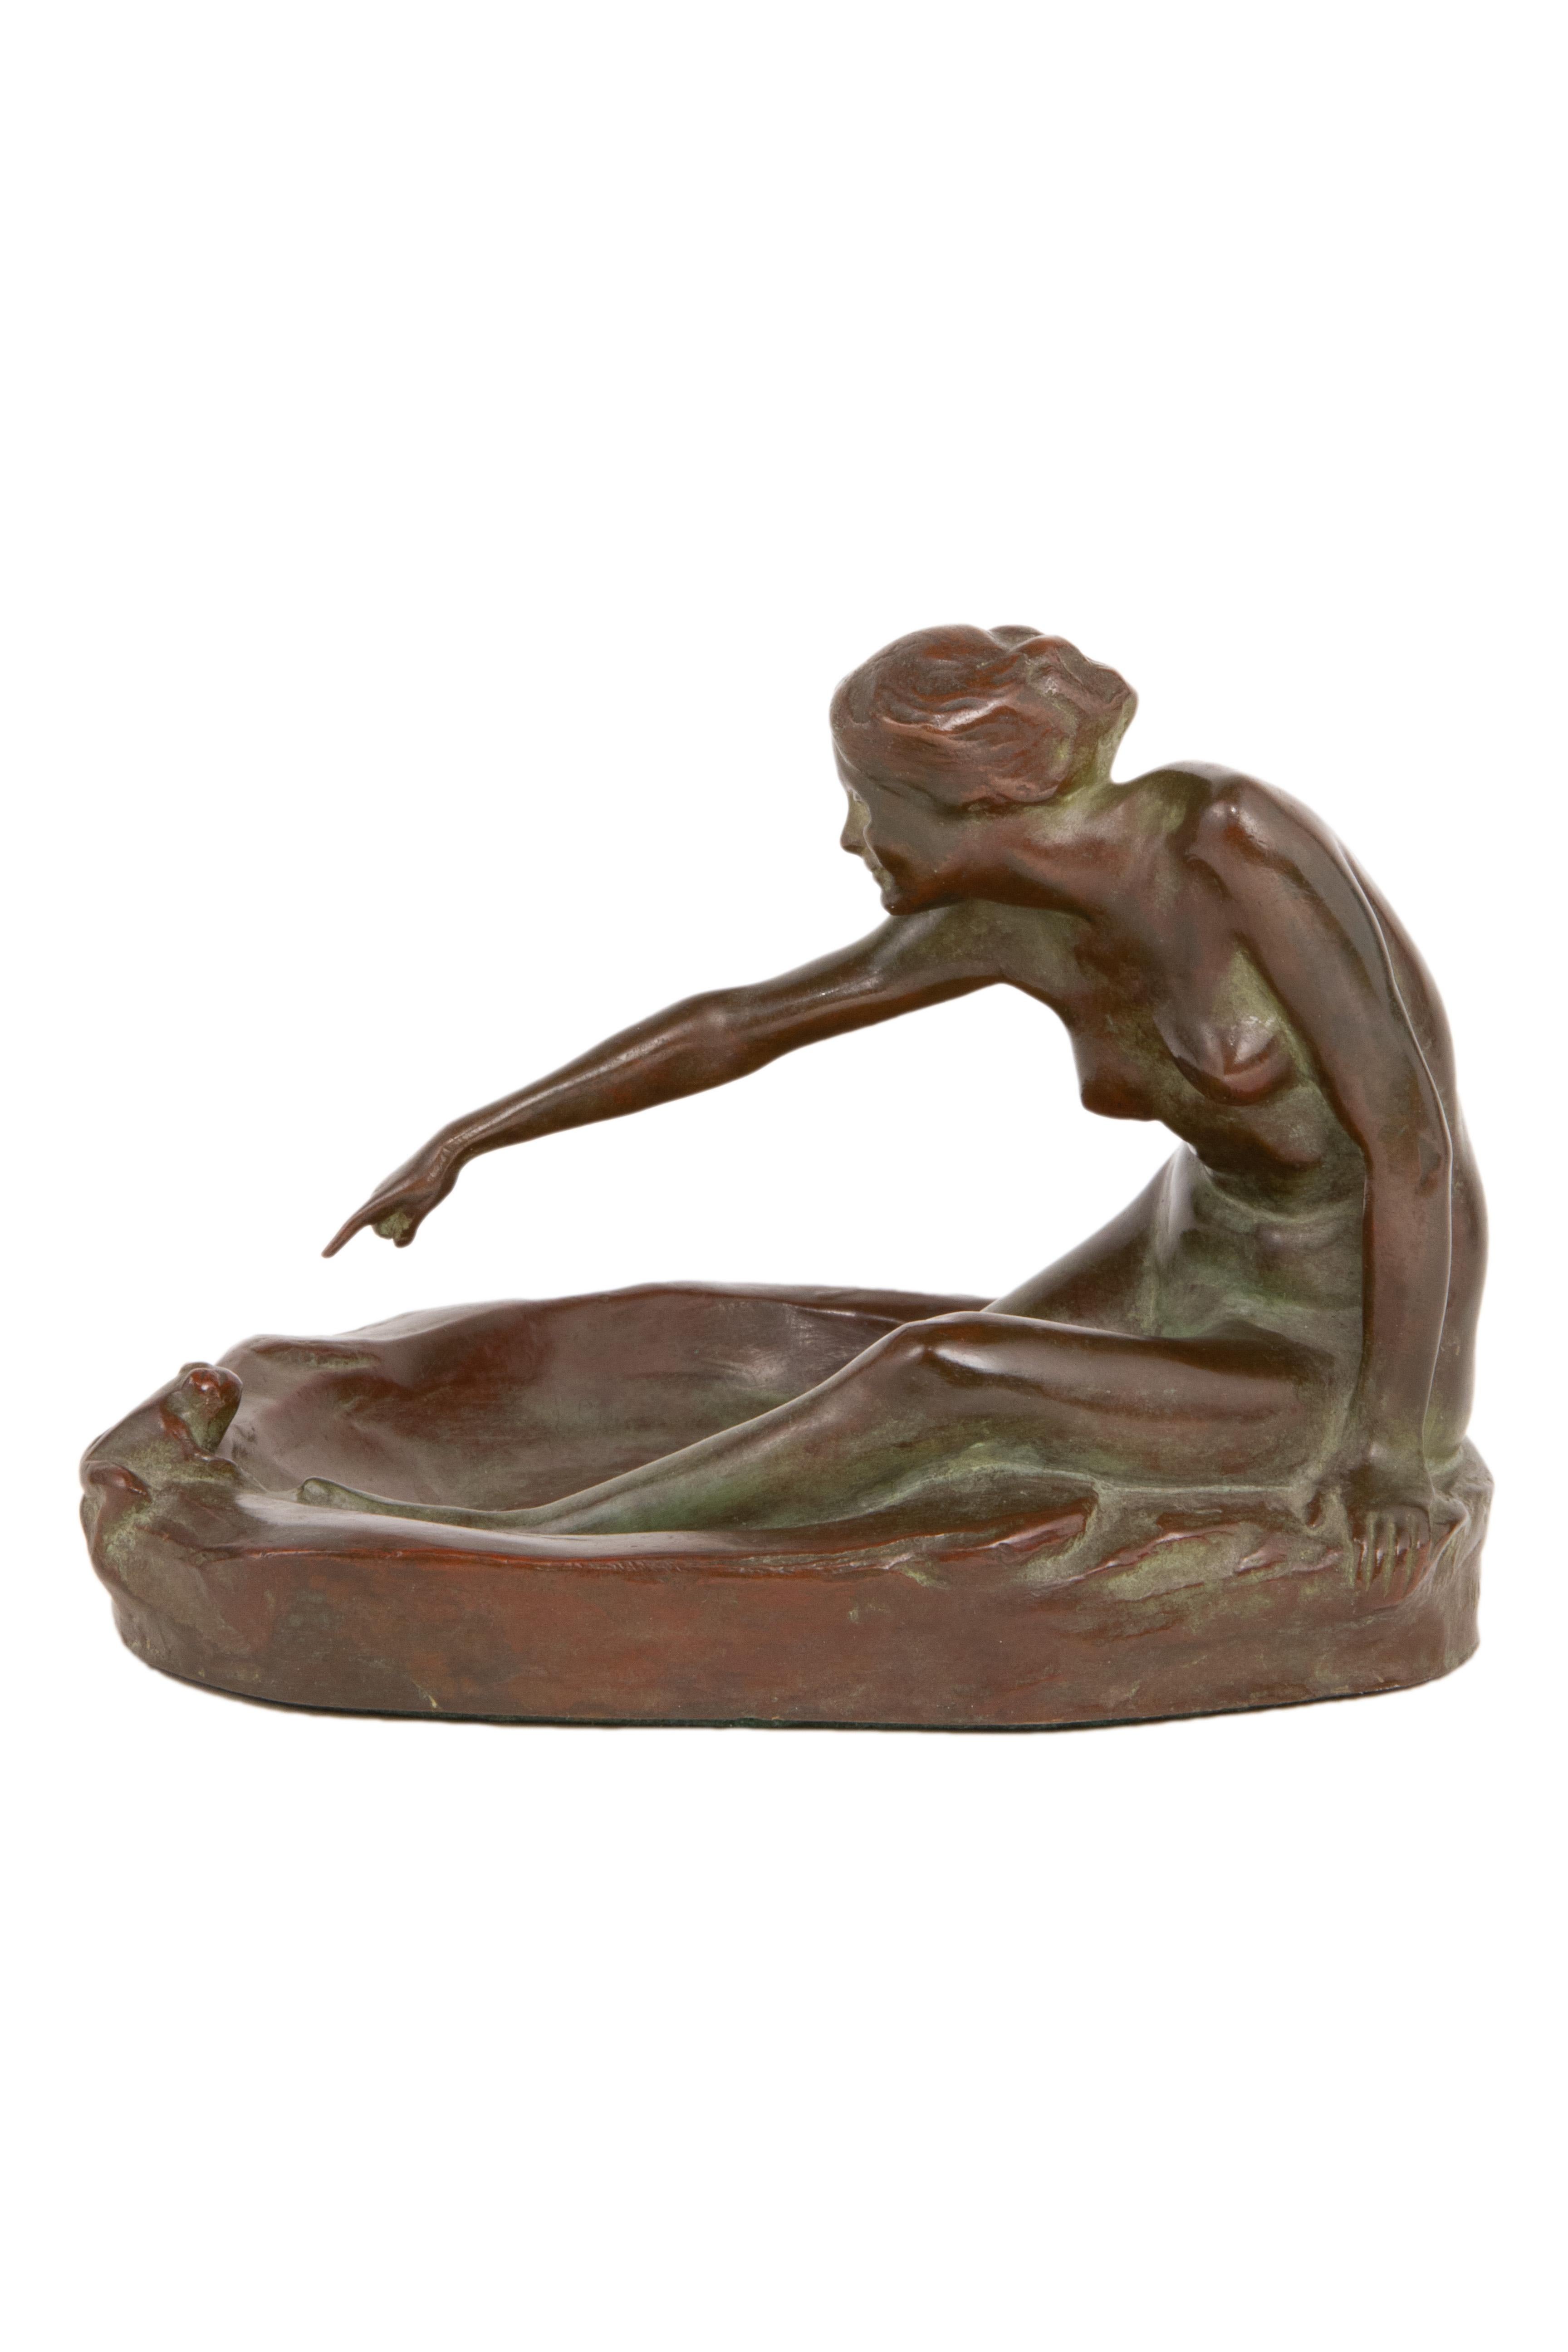 Bronze Girl with Frog American Art Nouveau Sculpture by, Harriet Whitney Frishmuth